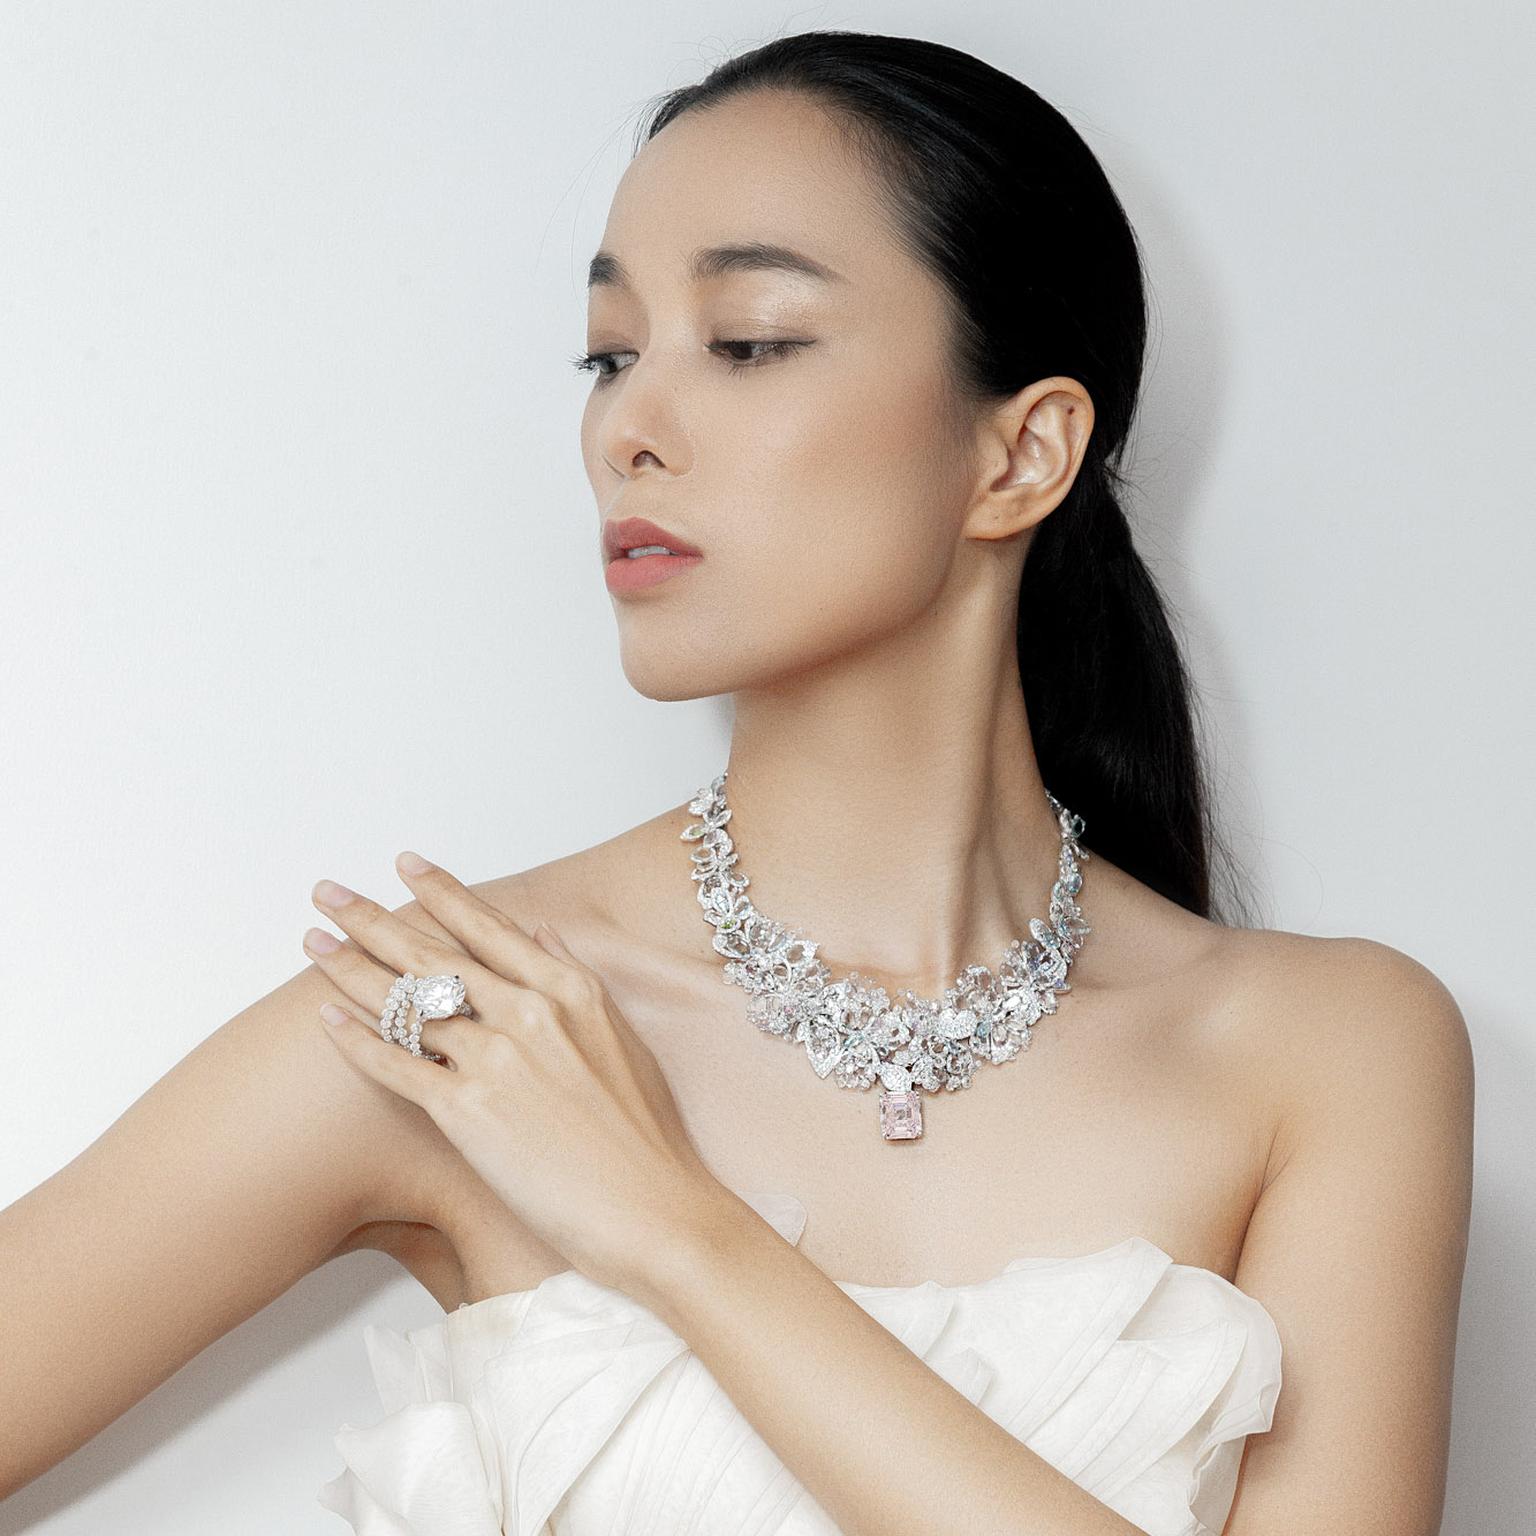 Preview of Phillips Hong Kong Jewels & Jadeite auction.